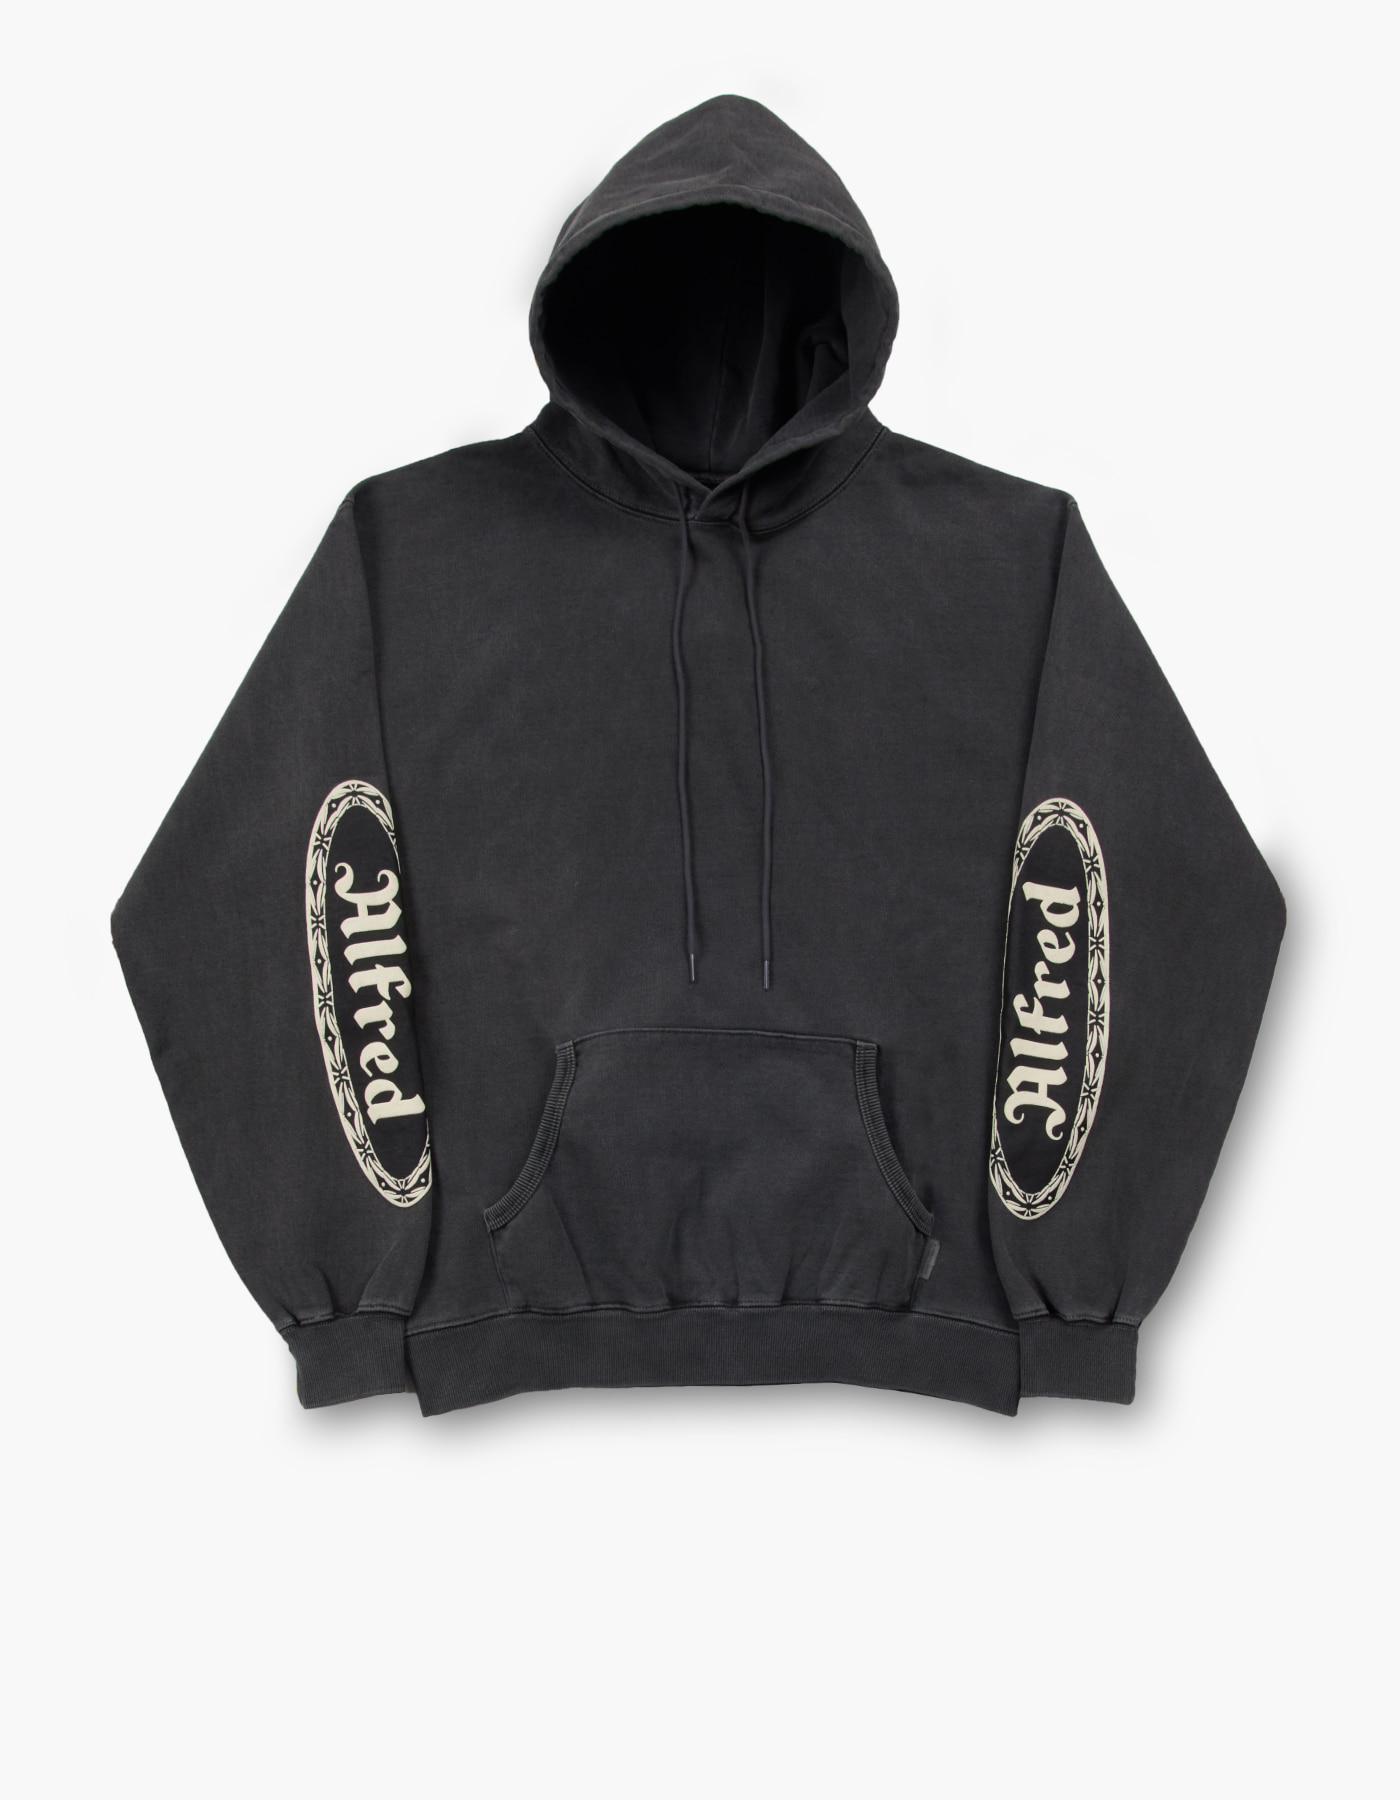 FRED PIGMENT HOODIE / CHARCOAL